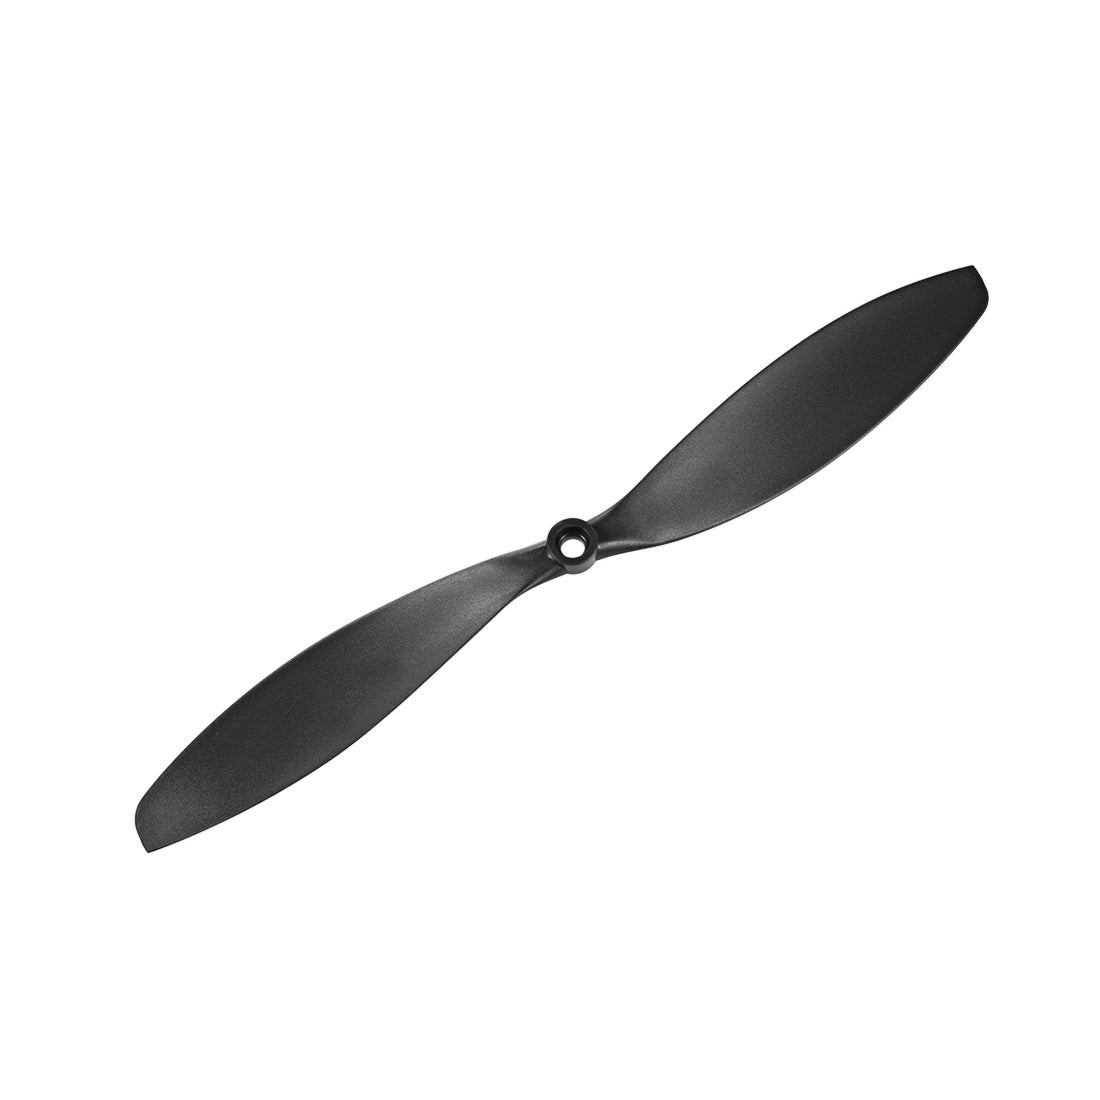 uxcell Uxcell RC Propellers CW CCW 1147 11x4.7 Inch 2-Vane Fixed-Wing for Airplane Toy, Nylon Black 4 Pair with Adapter Rings